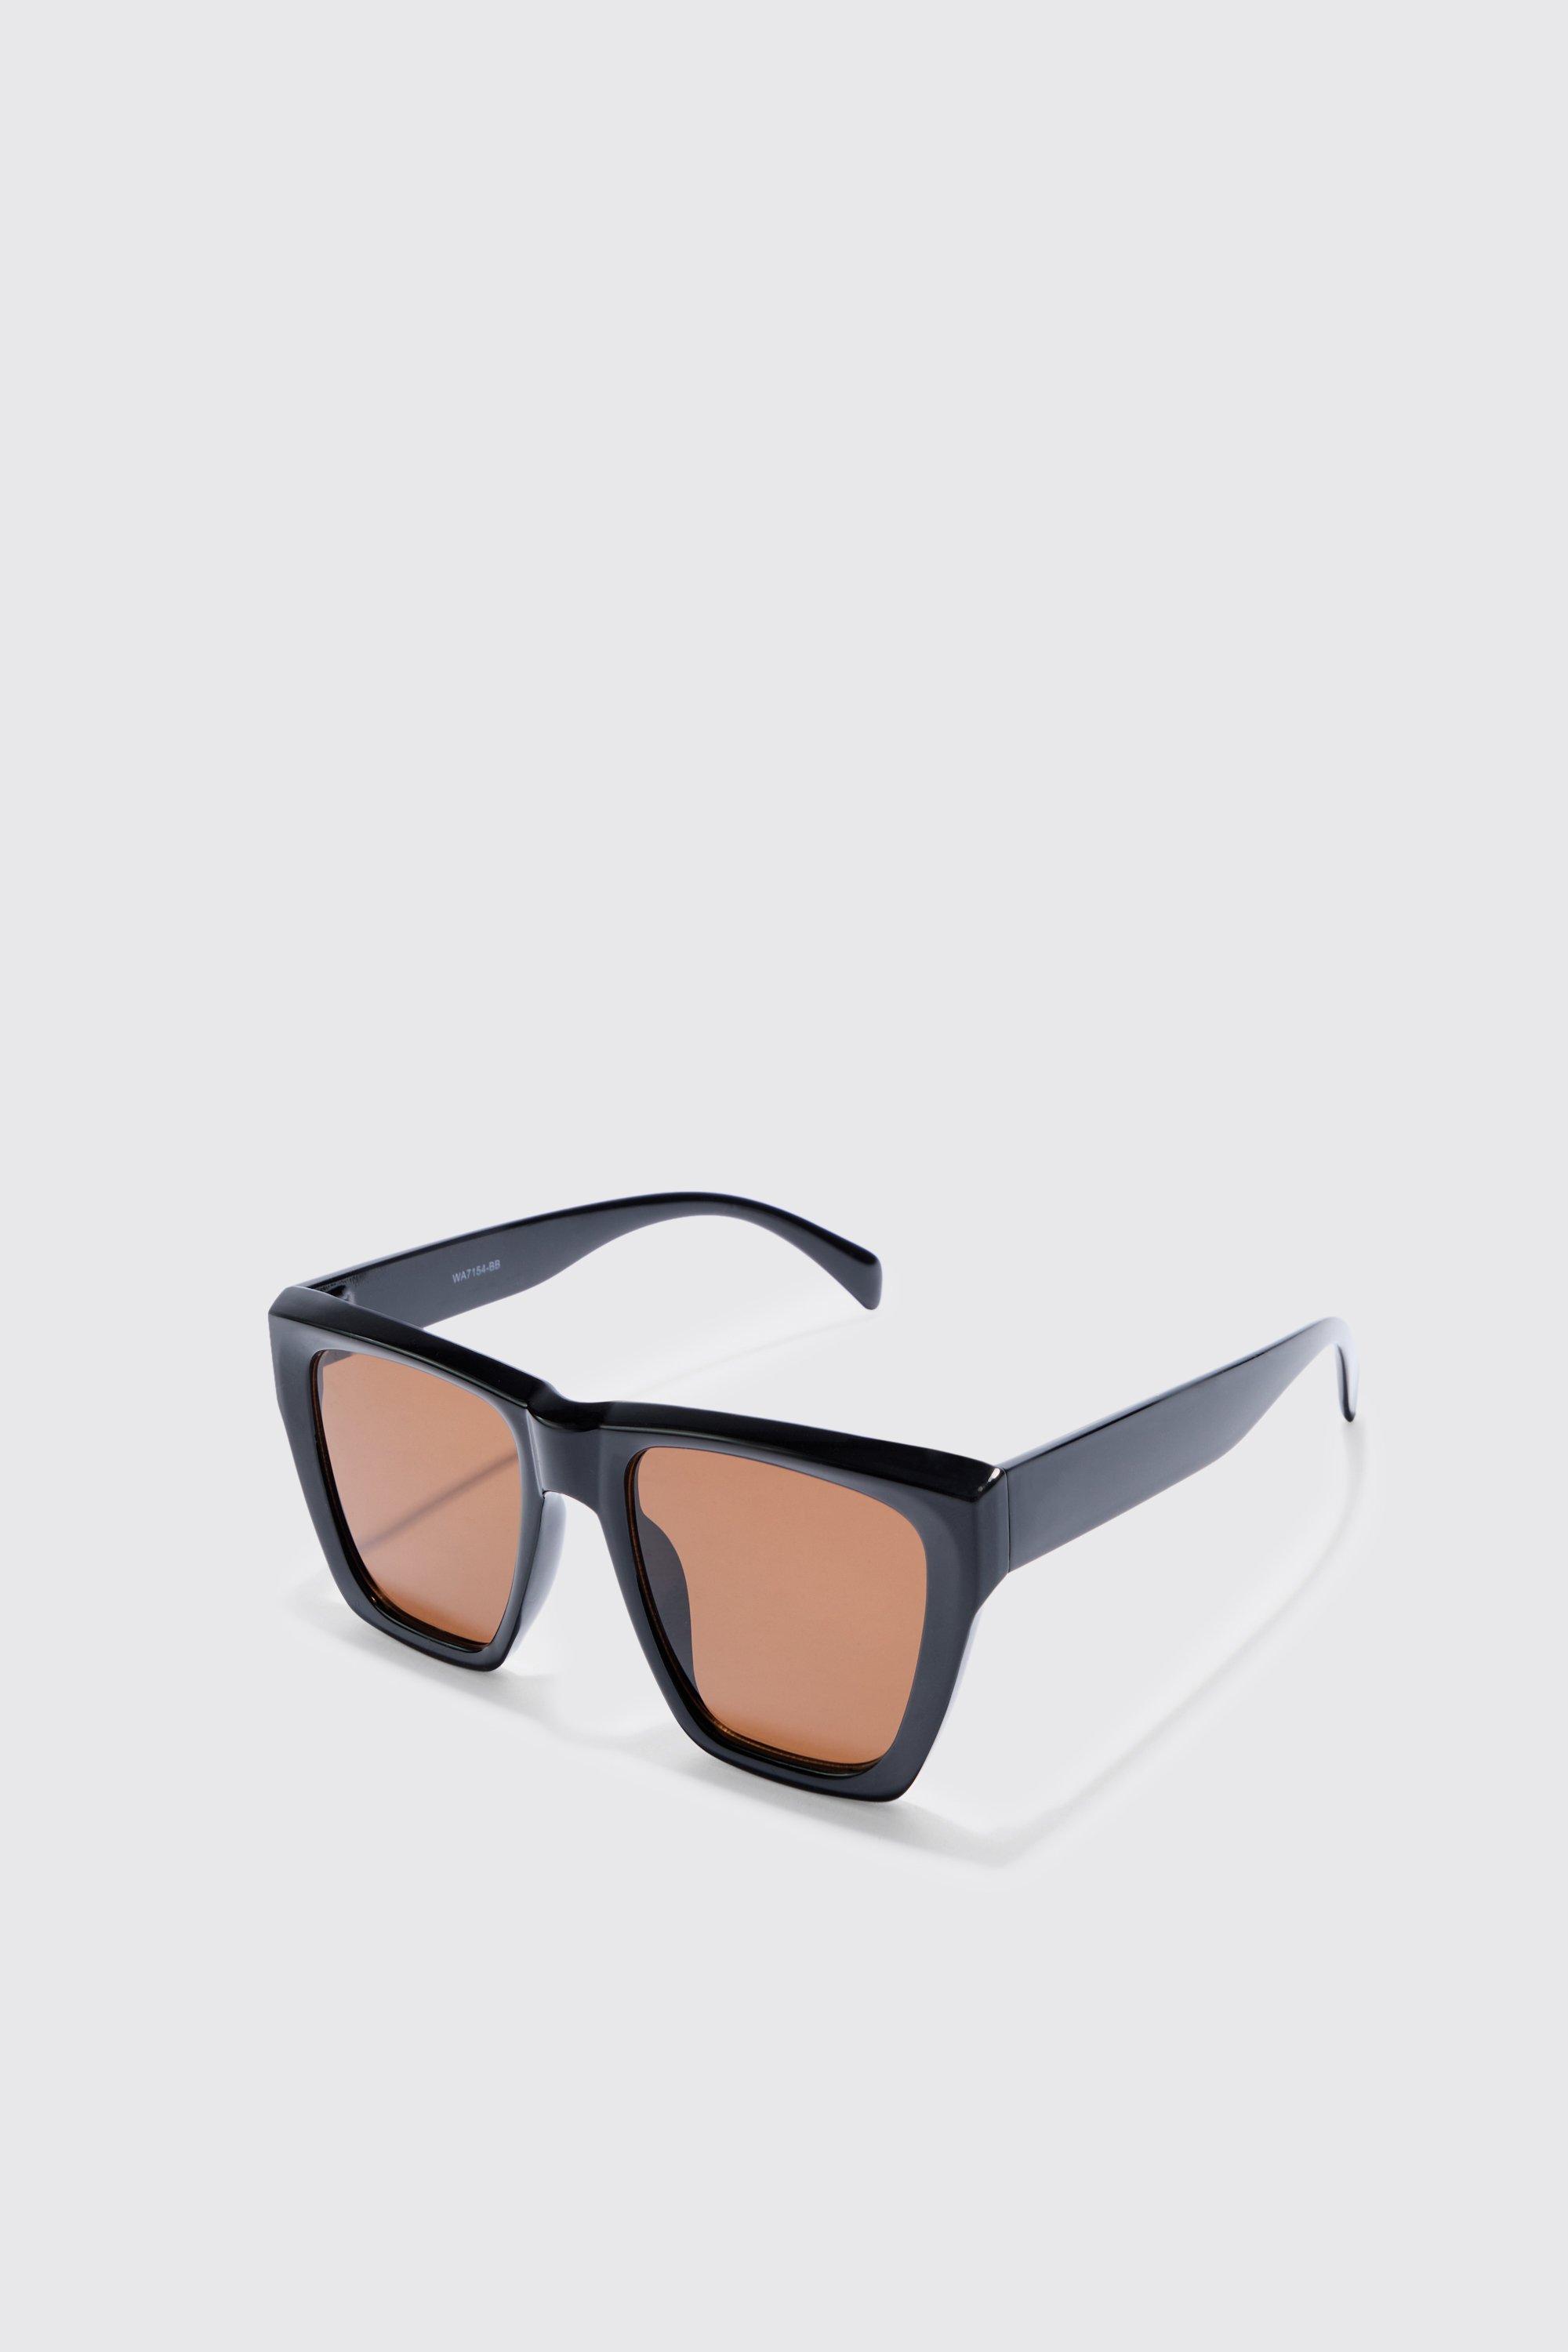 Image of Square Sunglasses With Brown Lens In Black, Nero